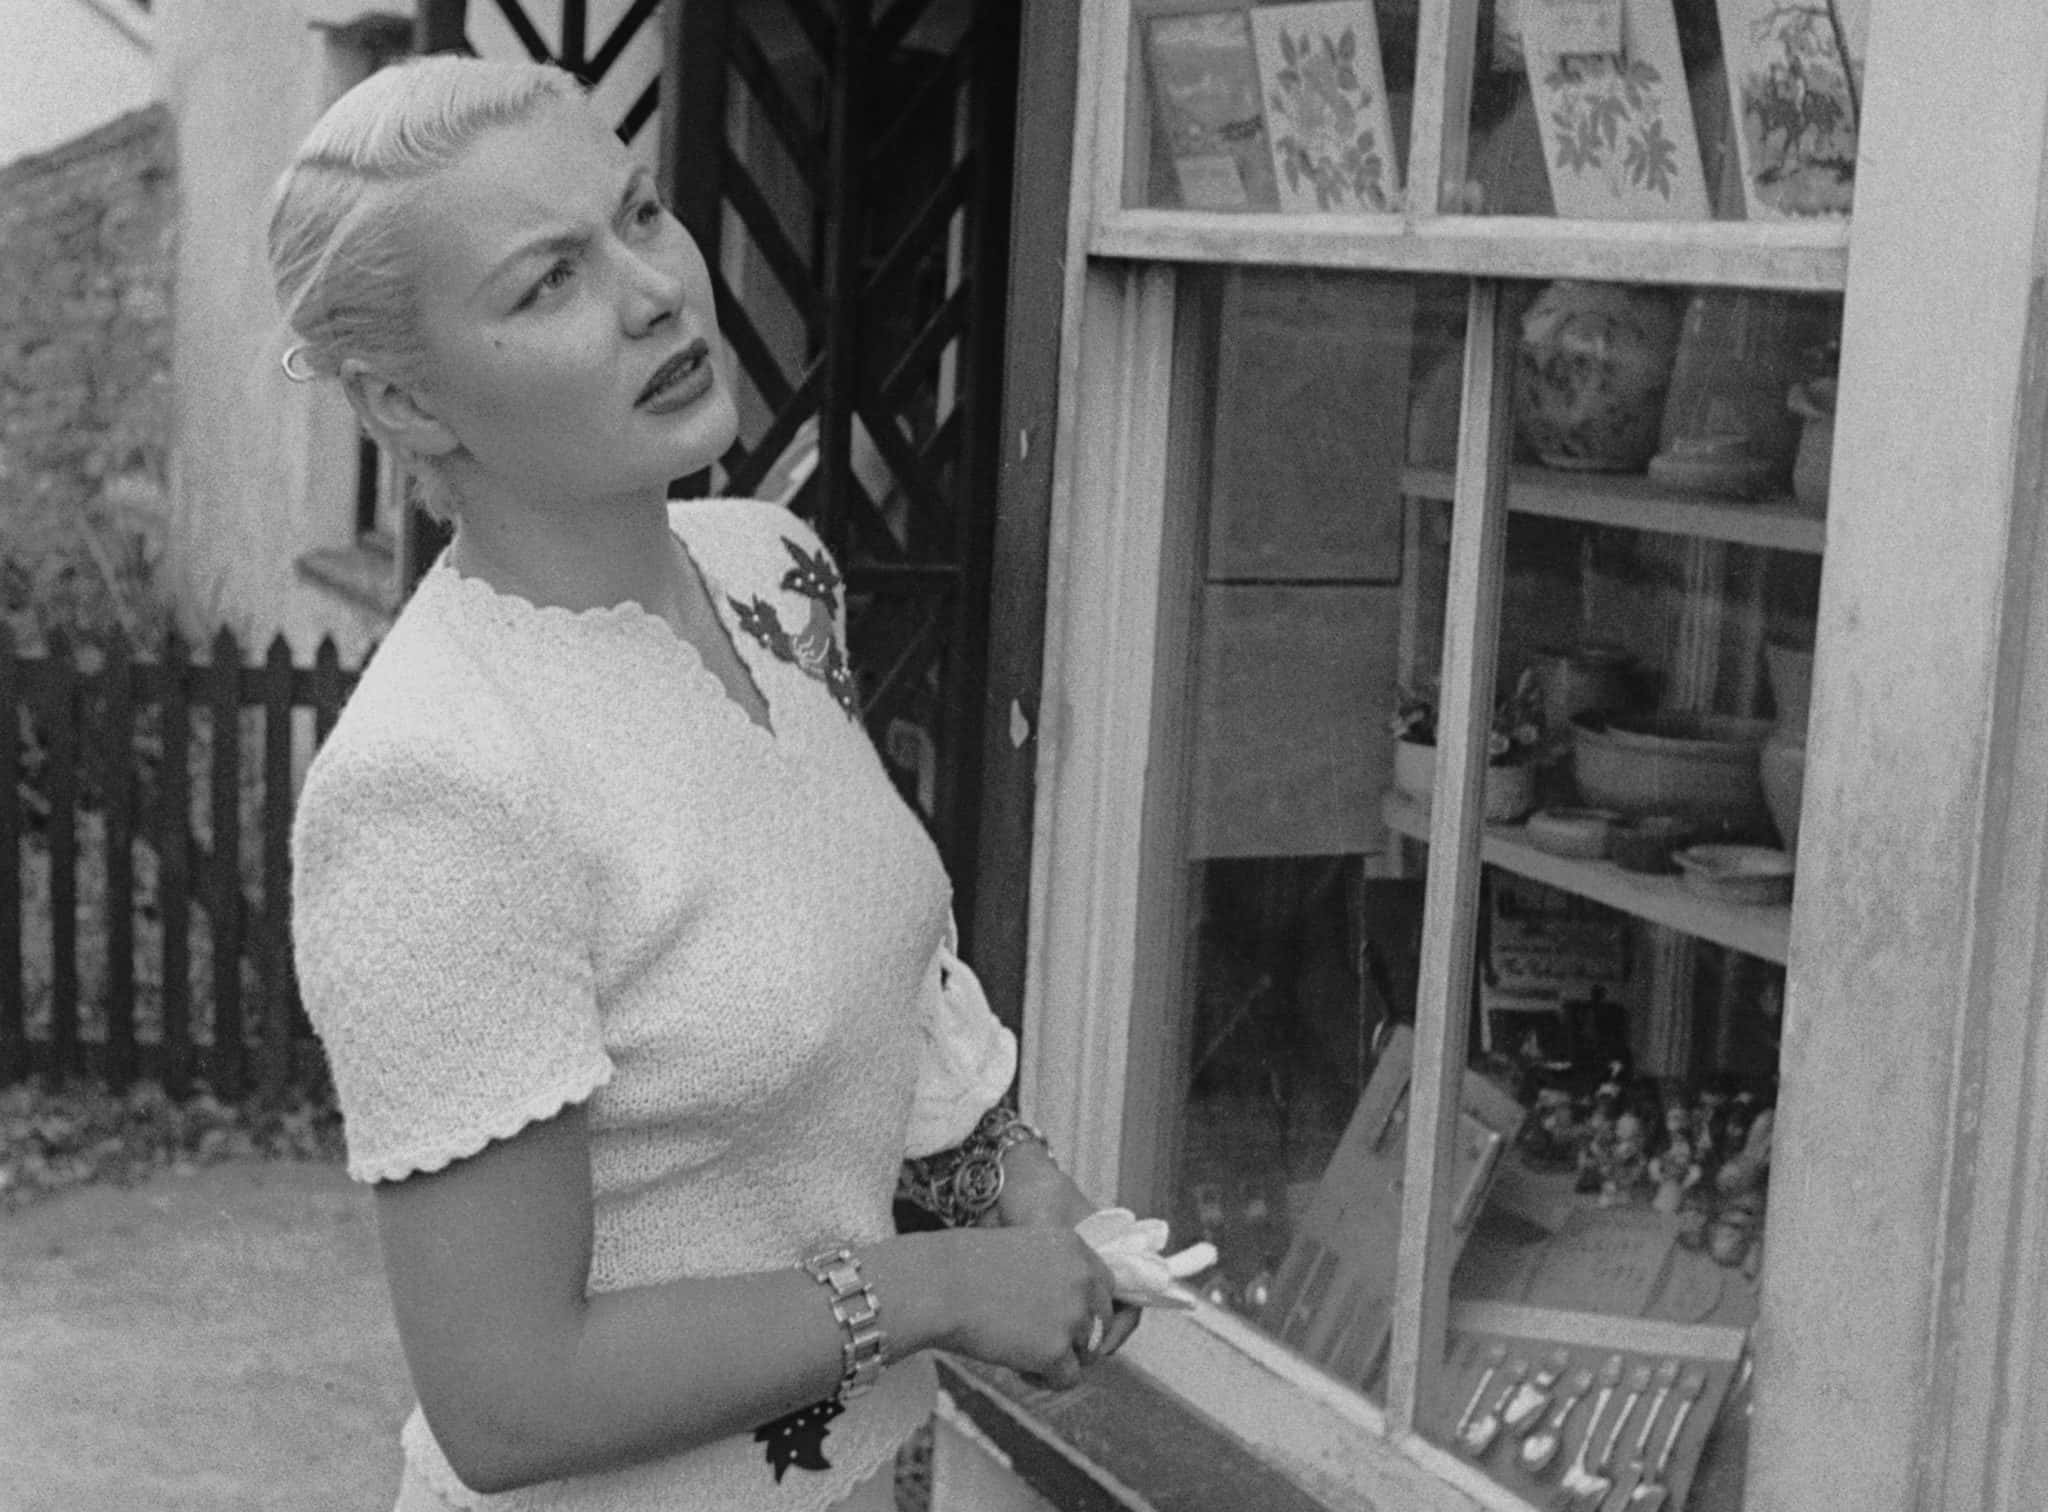 Seductive Facts About Barbara Payton The Succubus Of Old Hollywood